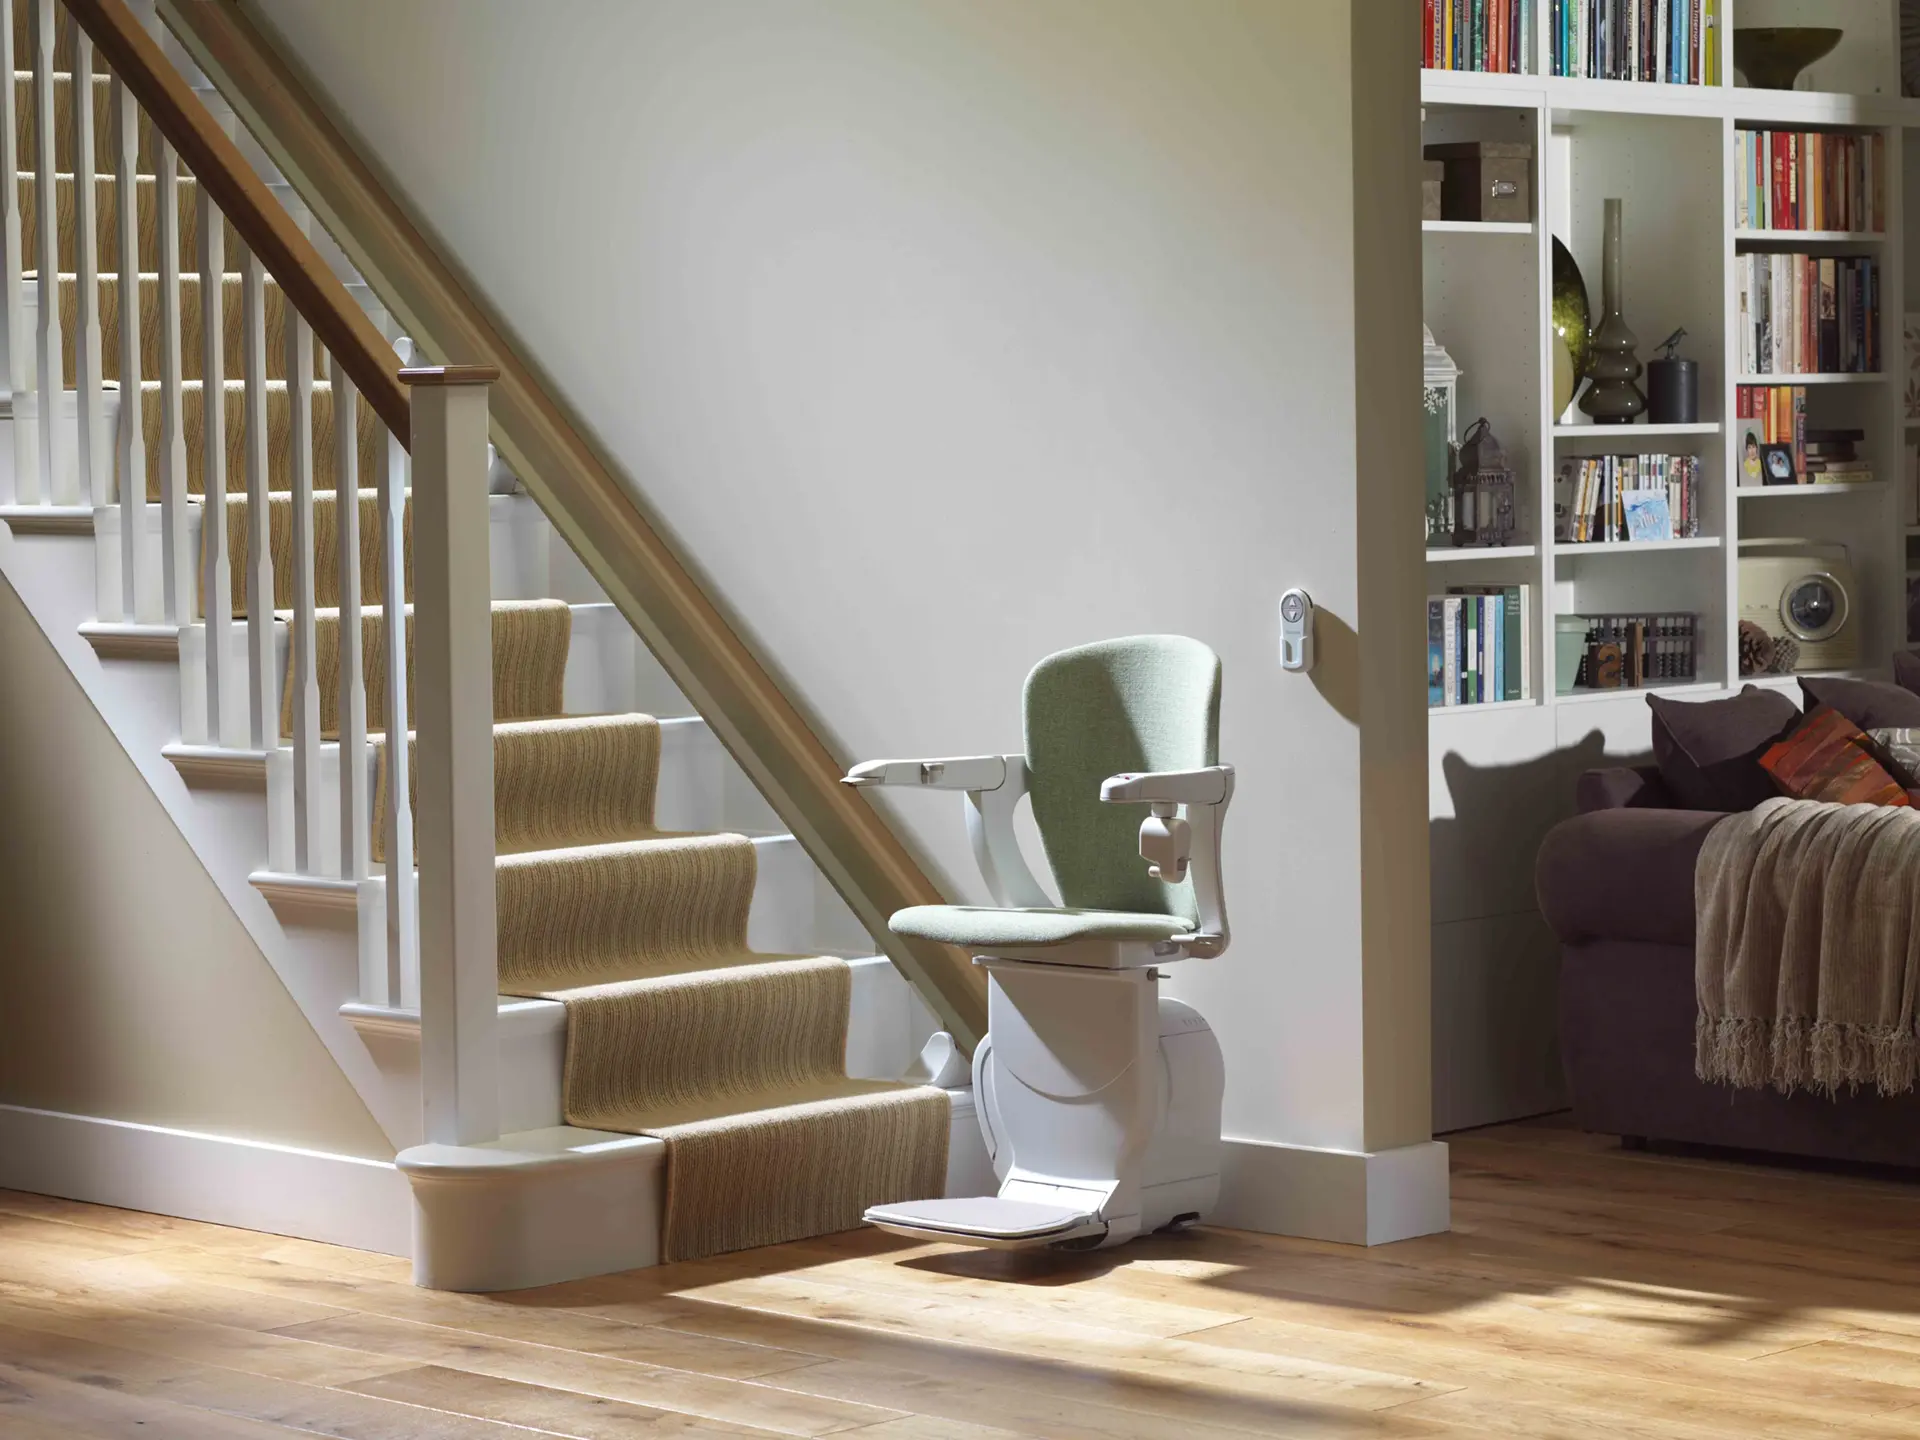 How Much Does a Stair Lift Cost?